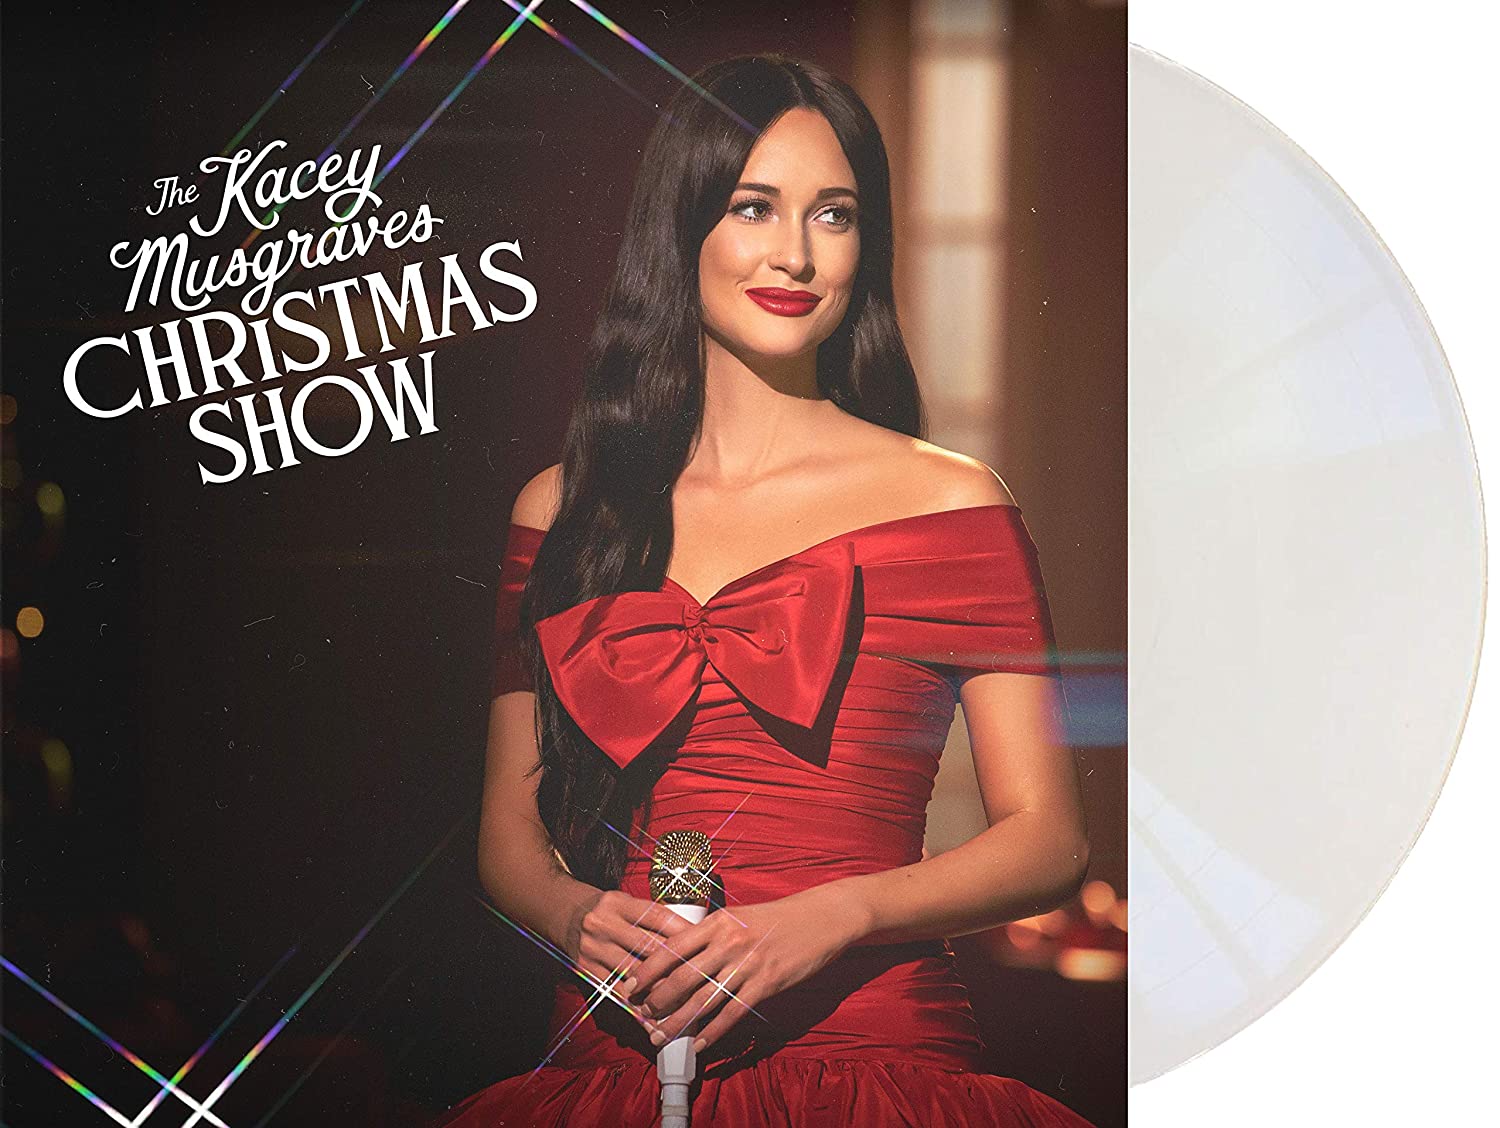 Kacey Musgraves The Kacey Musgraves Christmas Show Vinyl